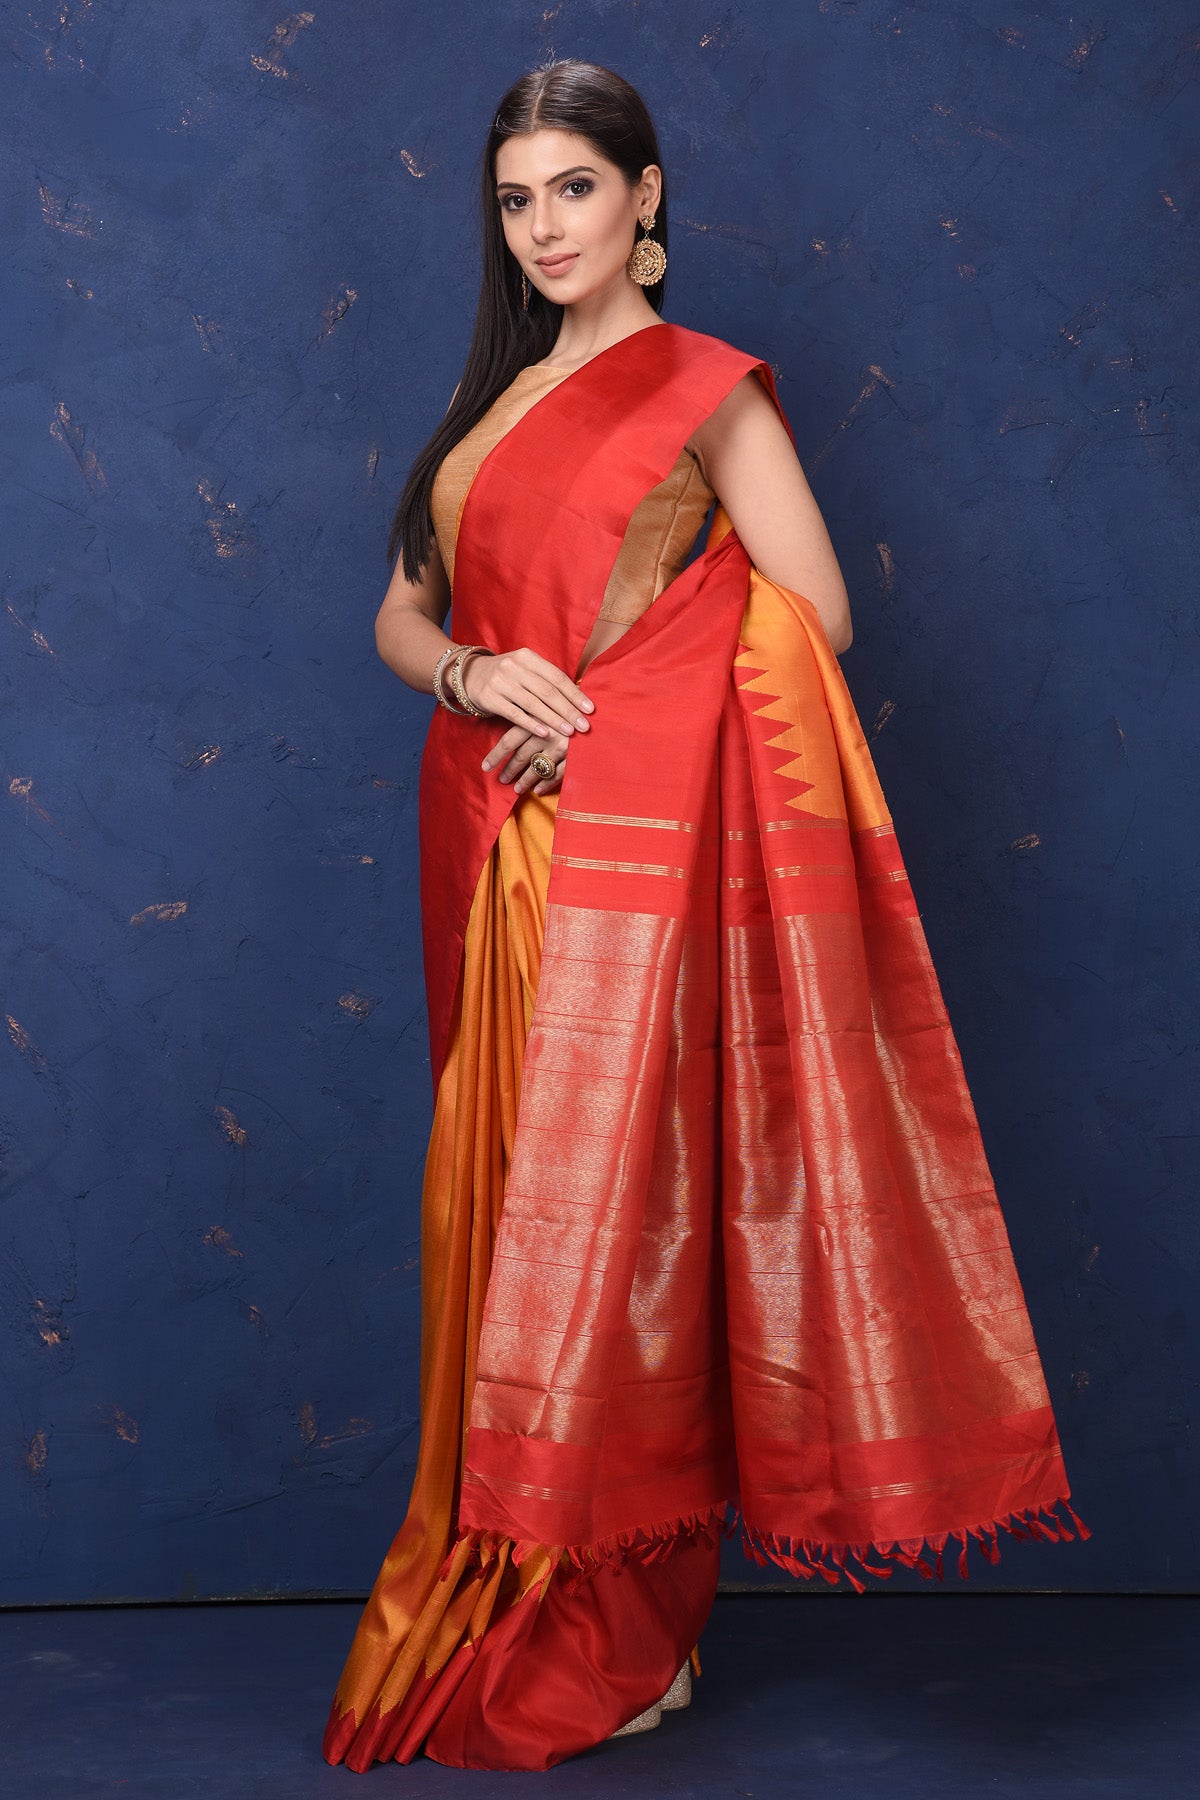 Buy beautiful orange Kanjivaram silk saree online in USA with red temple border. Flaunt your ethnic style at weddings and festive occasions in exquisite Indian sarees, Kanjeevaram sarees, handloom sarees, designer sarees, embroidered sarees from Pure Elegance Indian saree store in USA.-side